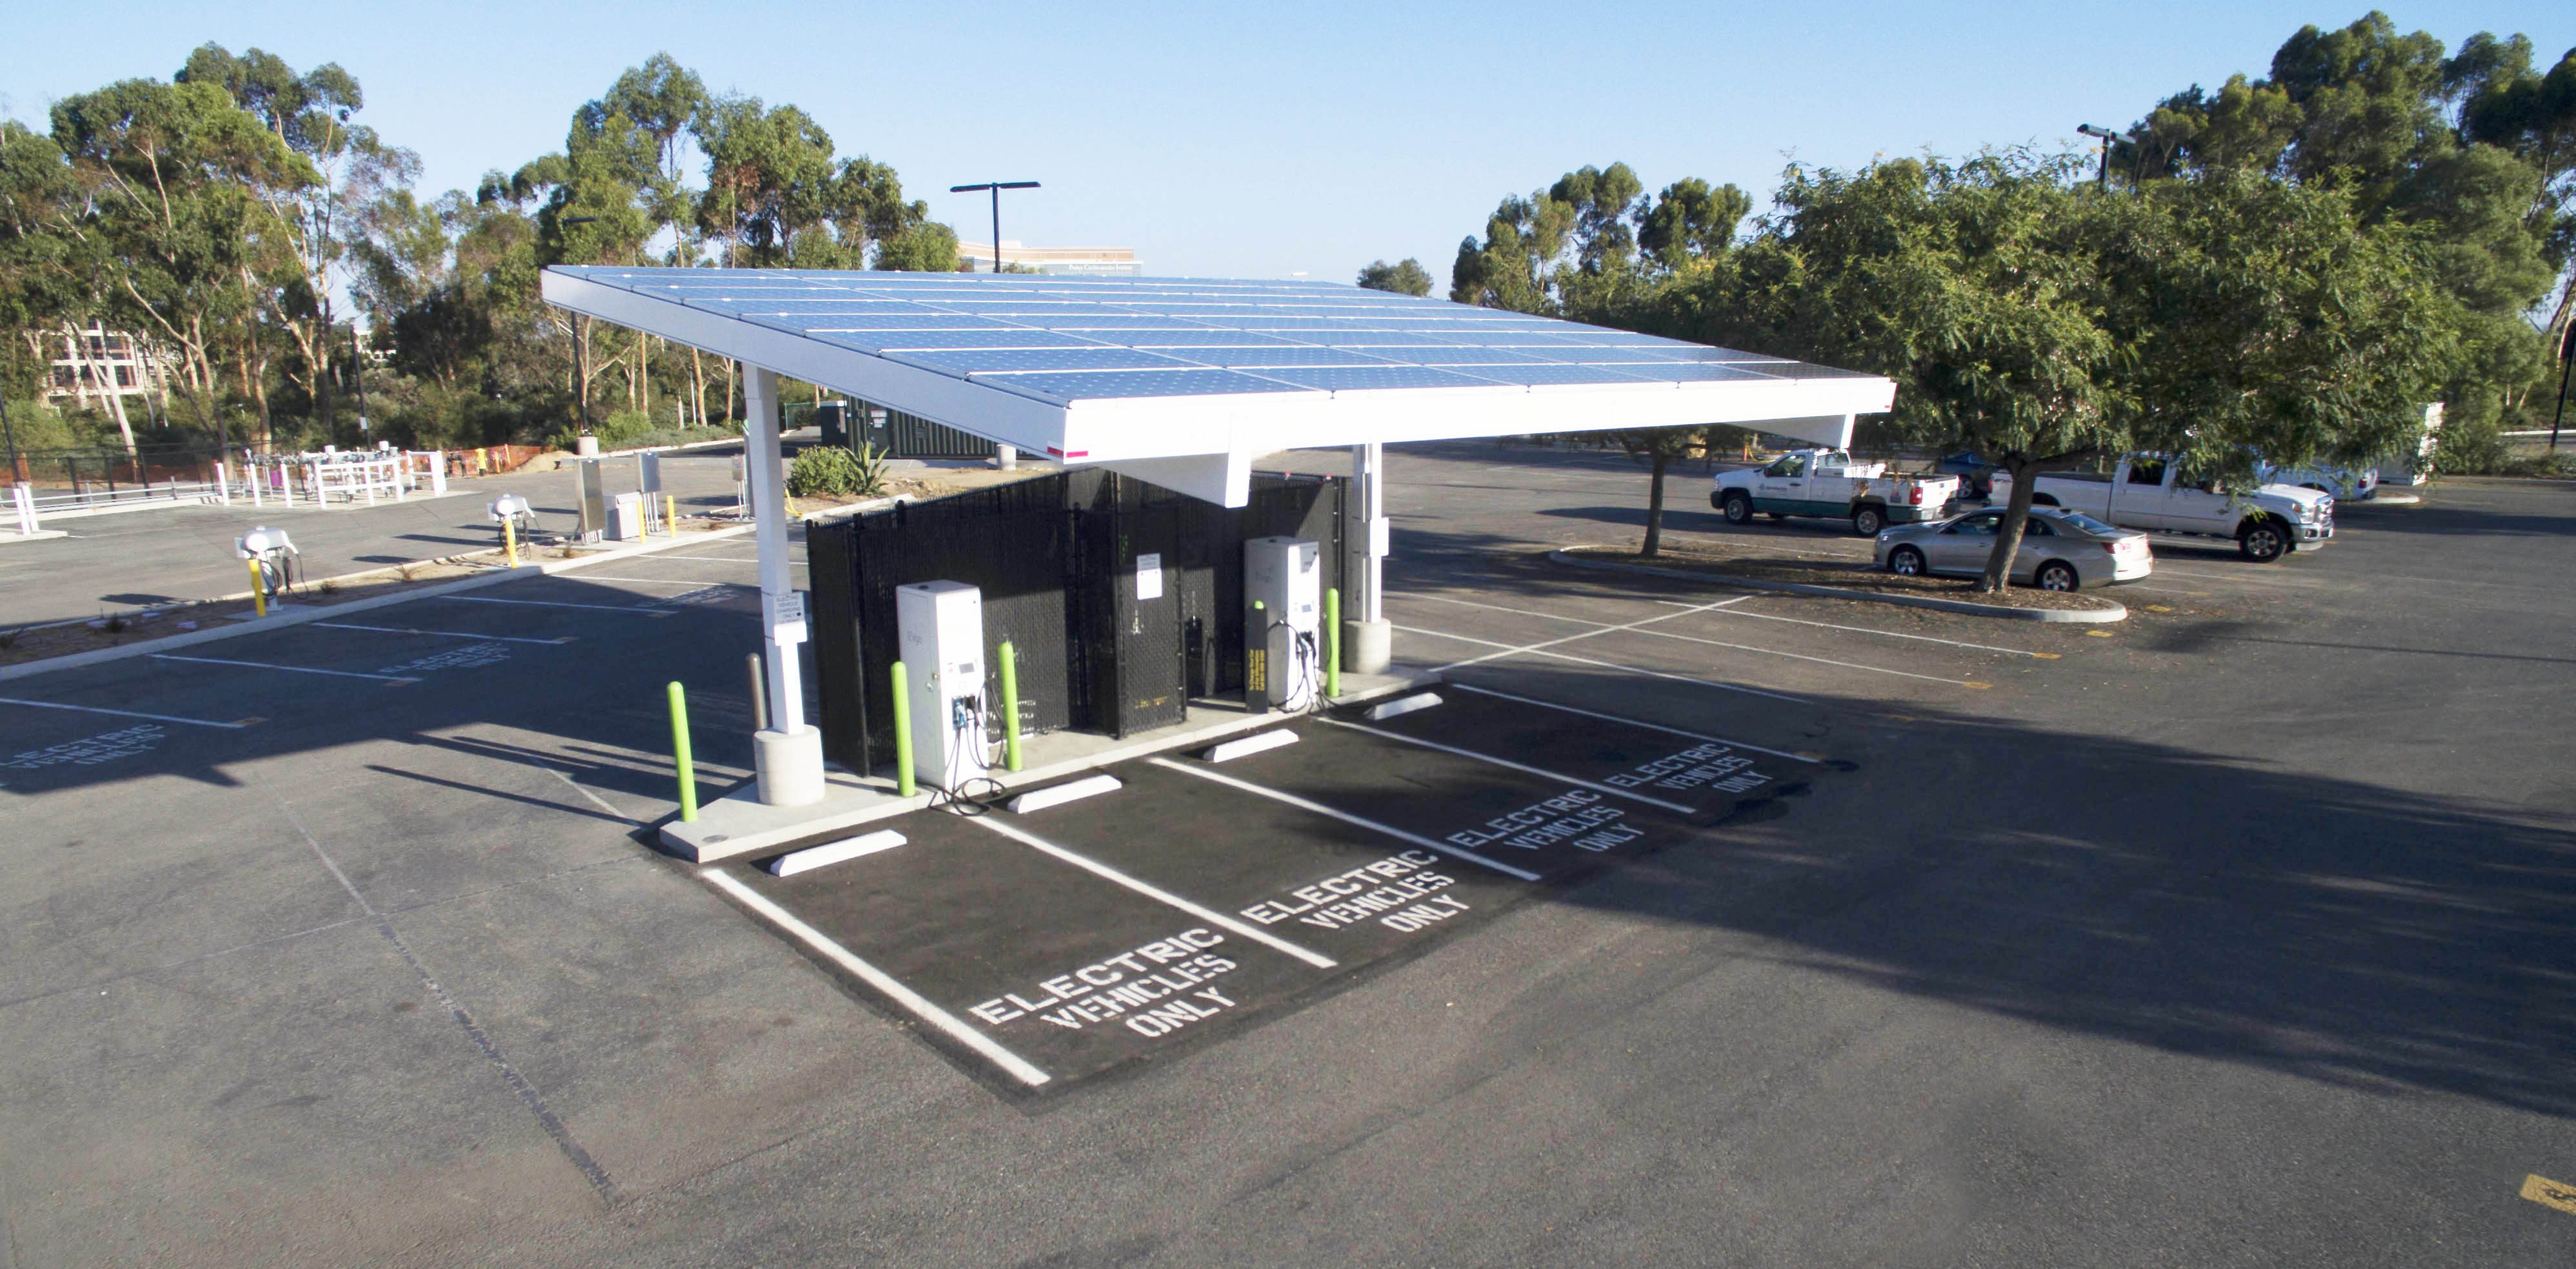 The first electric vehicle DC fast-charging station capable of 350 kW